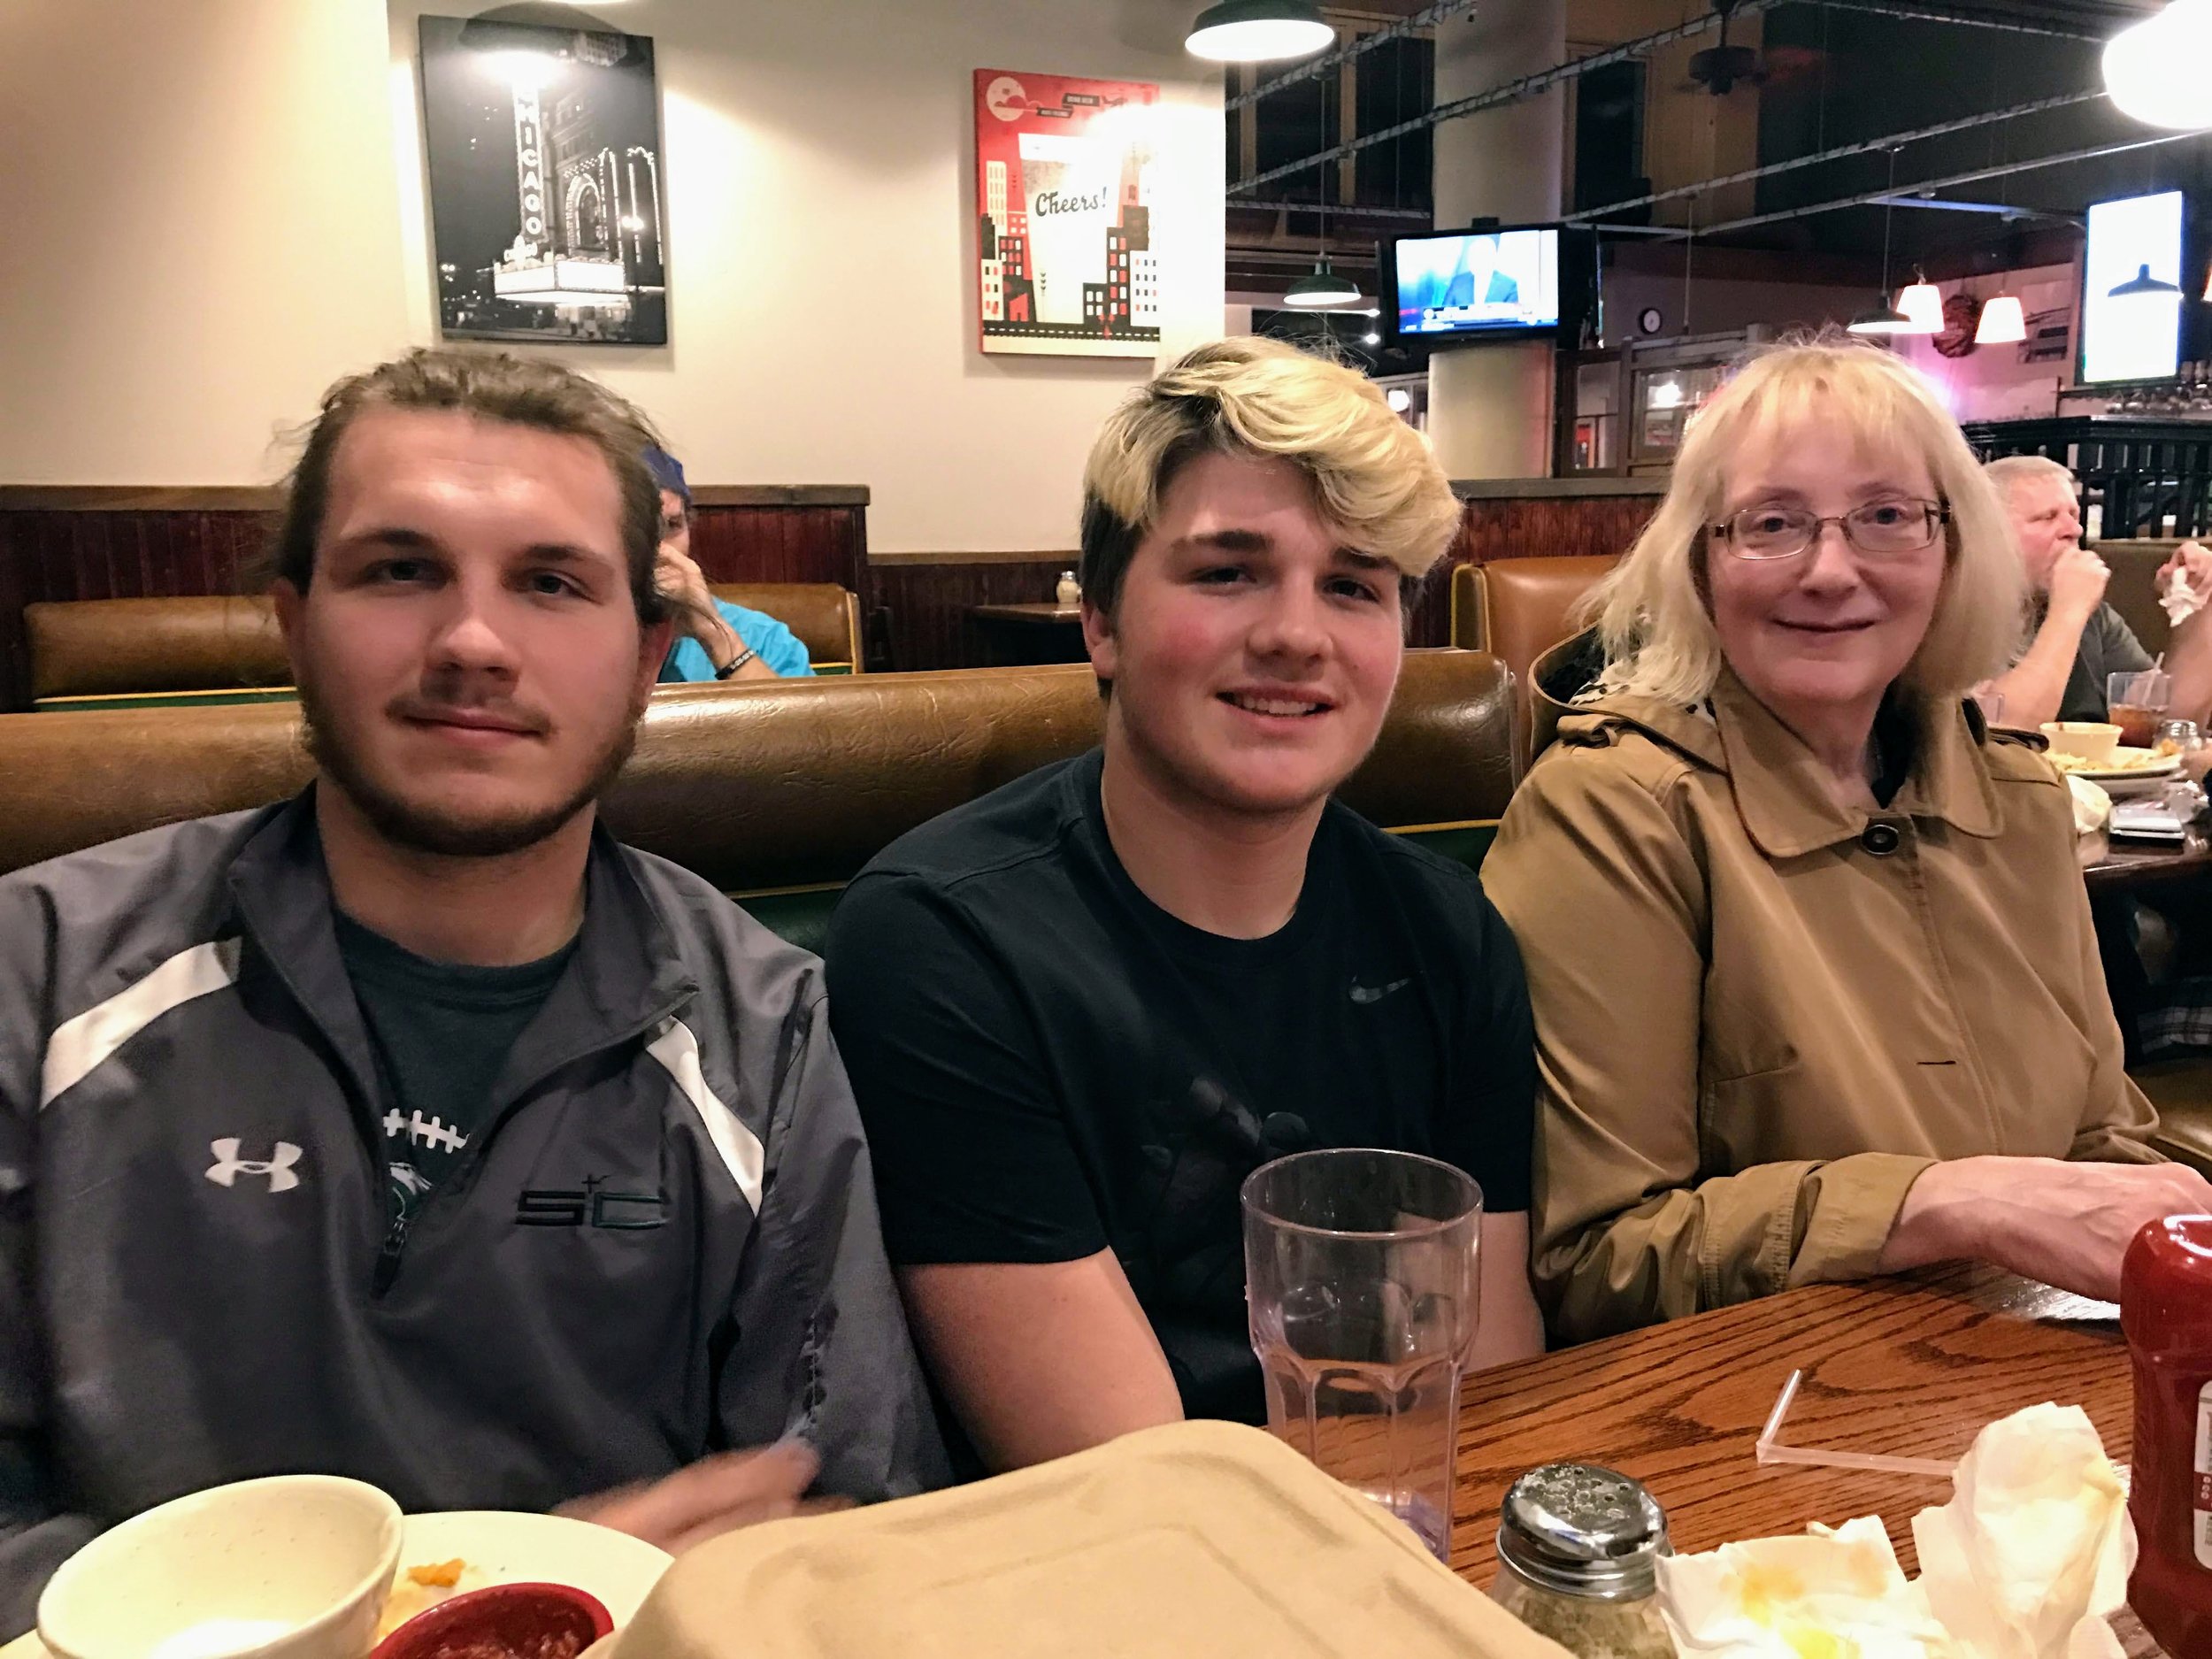 2017 - Visiting Ben at college in Lincoln, NE